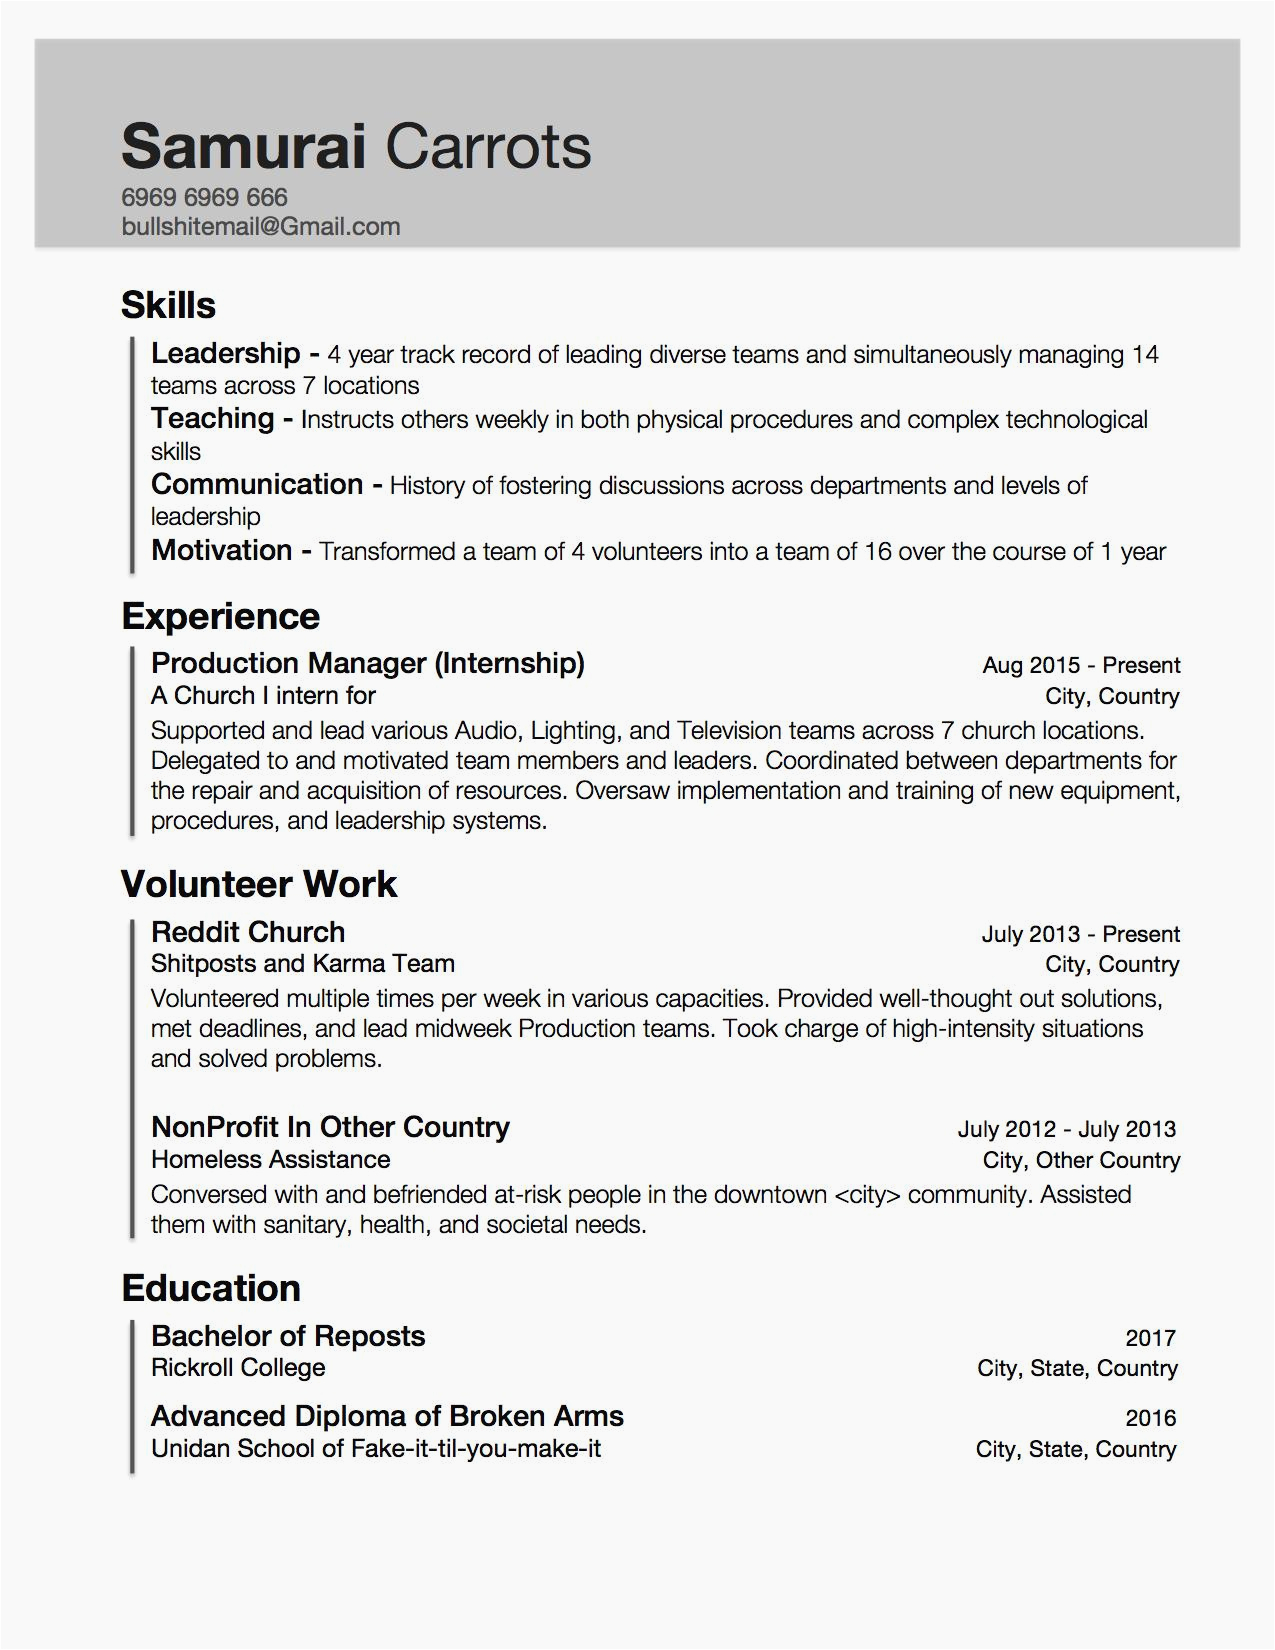 Resume Templates for Students with Little Experience Resume Samples with Little Work Experience